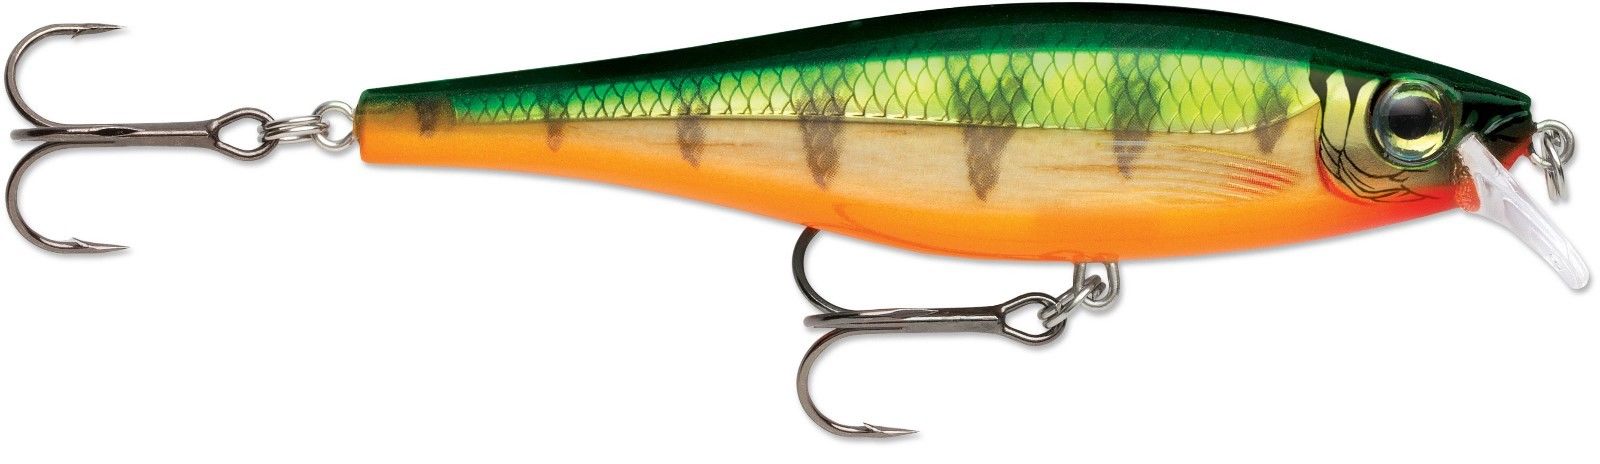  Balsa Xtreme Jointed Minnow 09 Blue Back Herring : General  Sporting Equipment : Sports & Outdoors